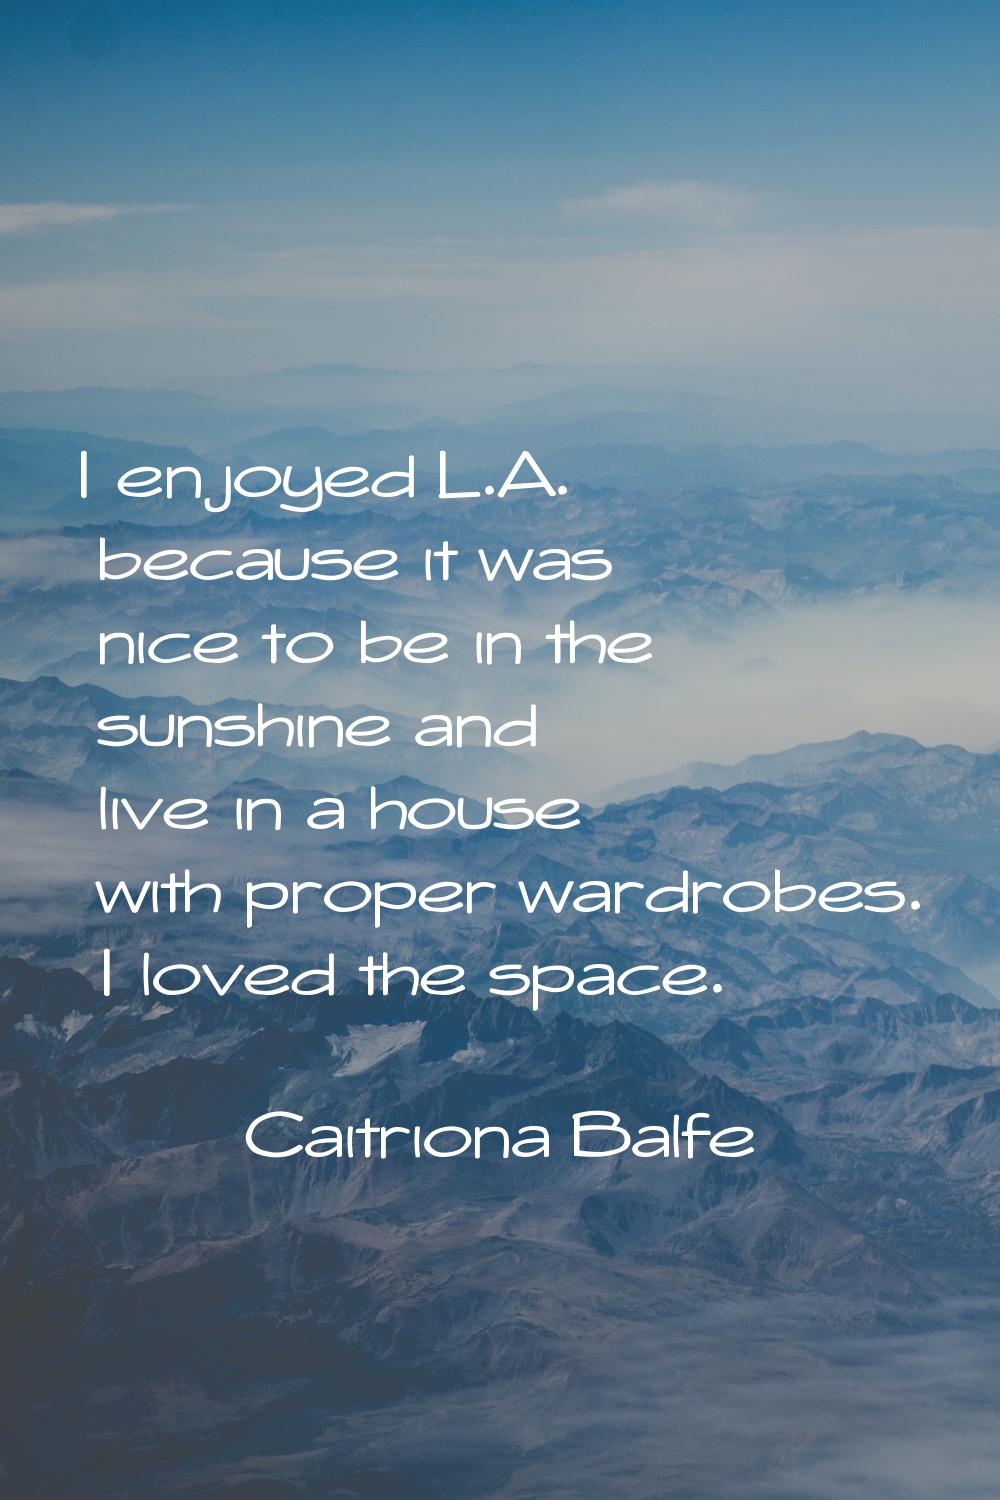 I enjoyed L.A. because it was nice to be in the sunshine and live in a house with proper wardrobes.